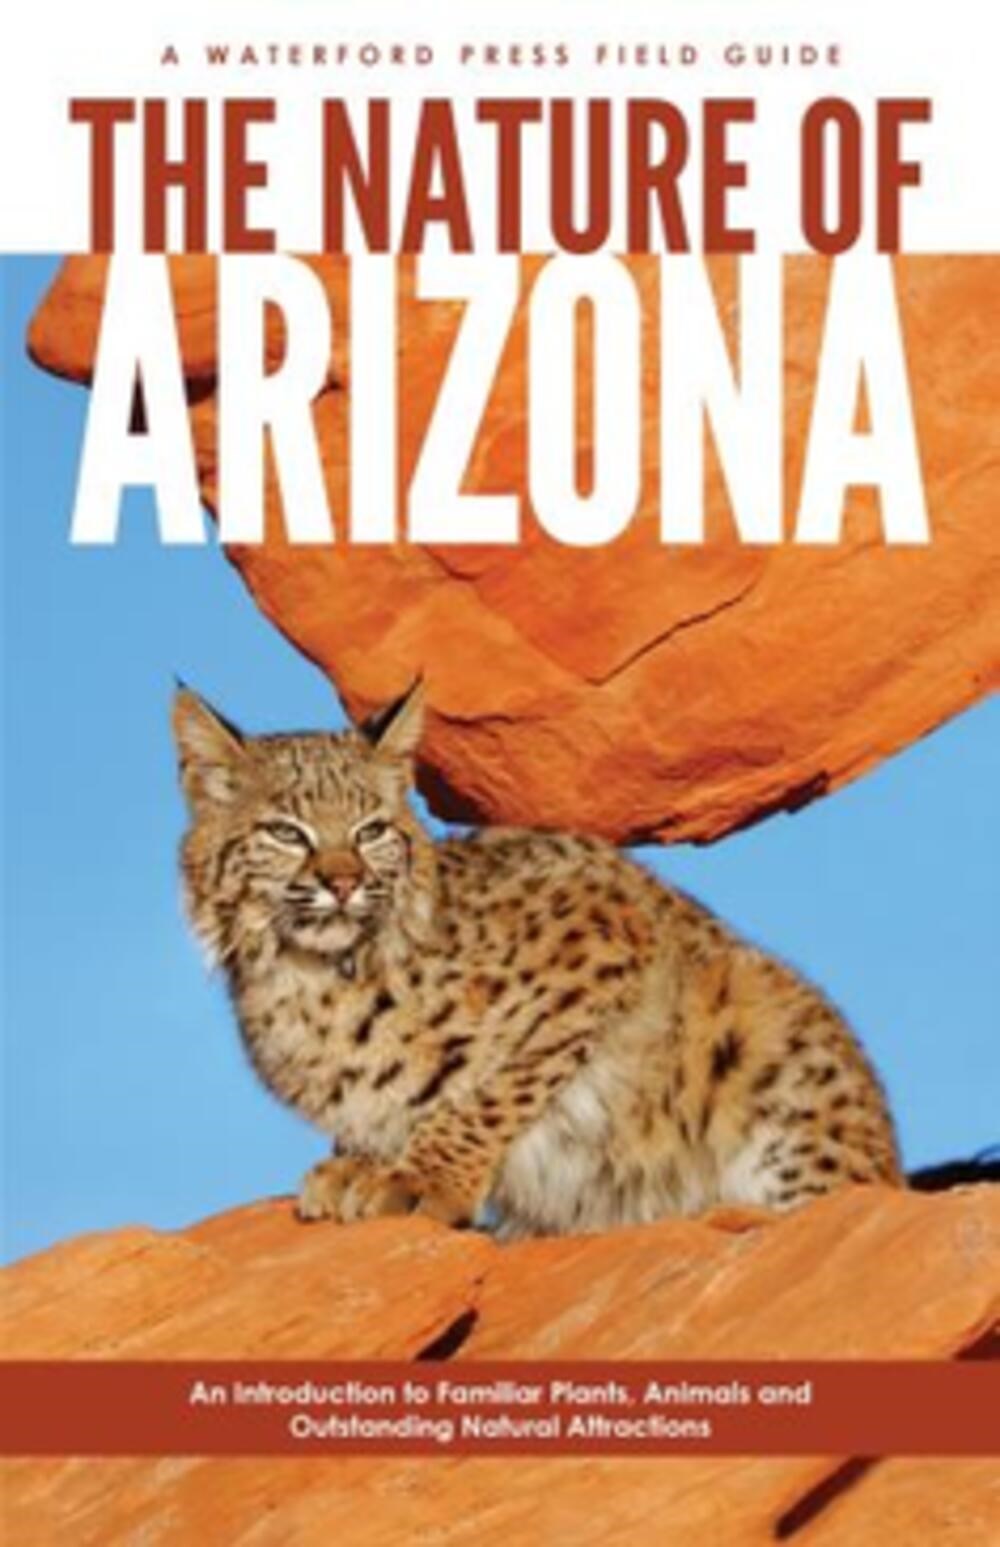 The Nature of Arizona: An Introduction to Familiar Plants, Animals & Outstanding Natural Attractions (2nd Edition)